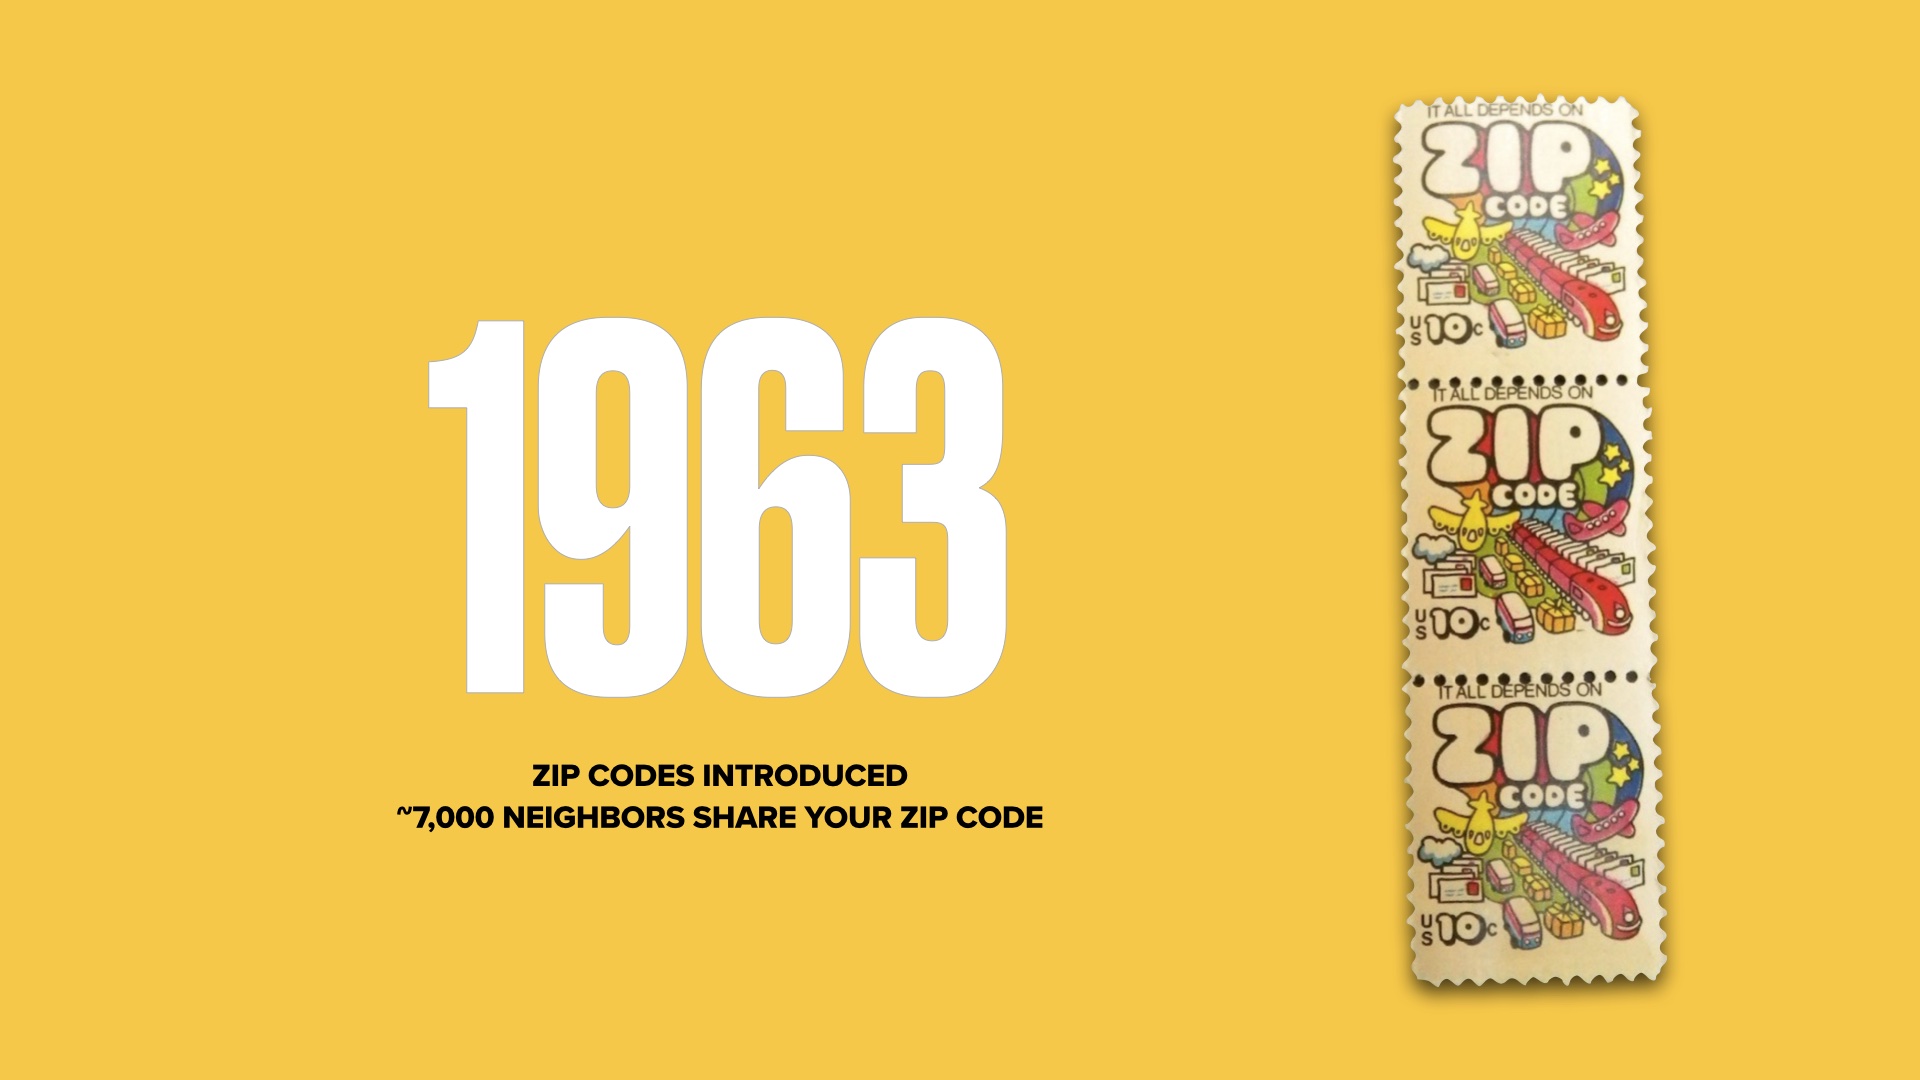 Slide with very large number 1963 across it with a sidebar image of fancy cartoonish stamps announcing the ZIP code. Caption 